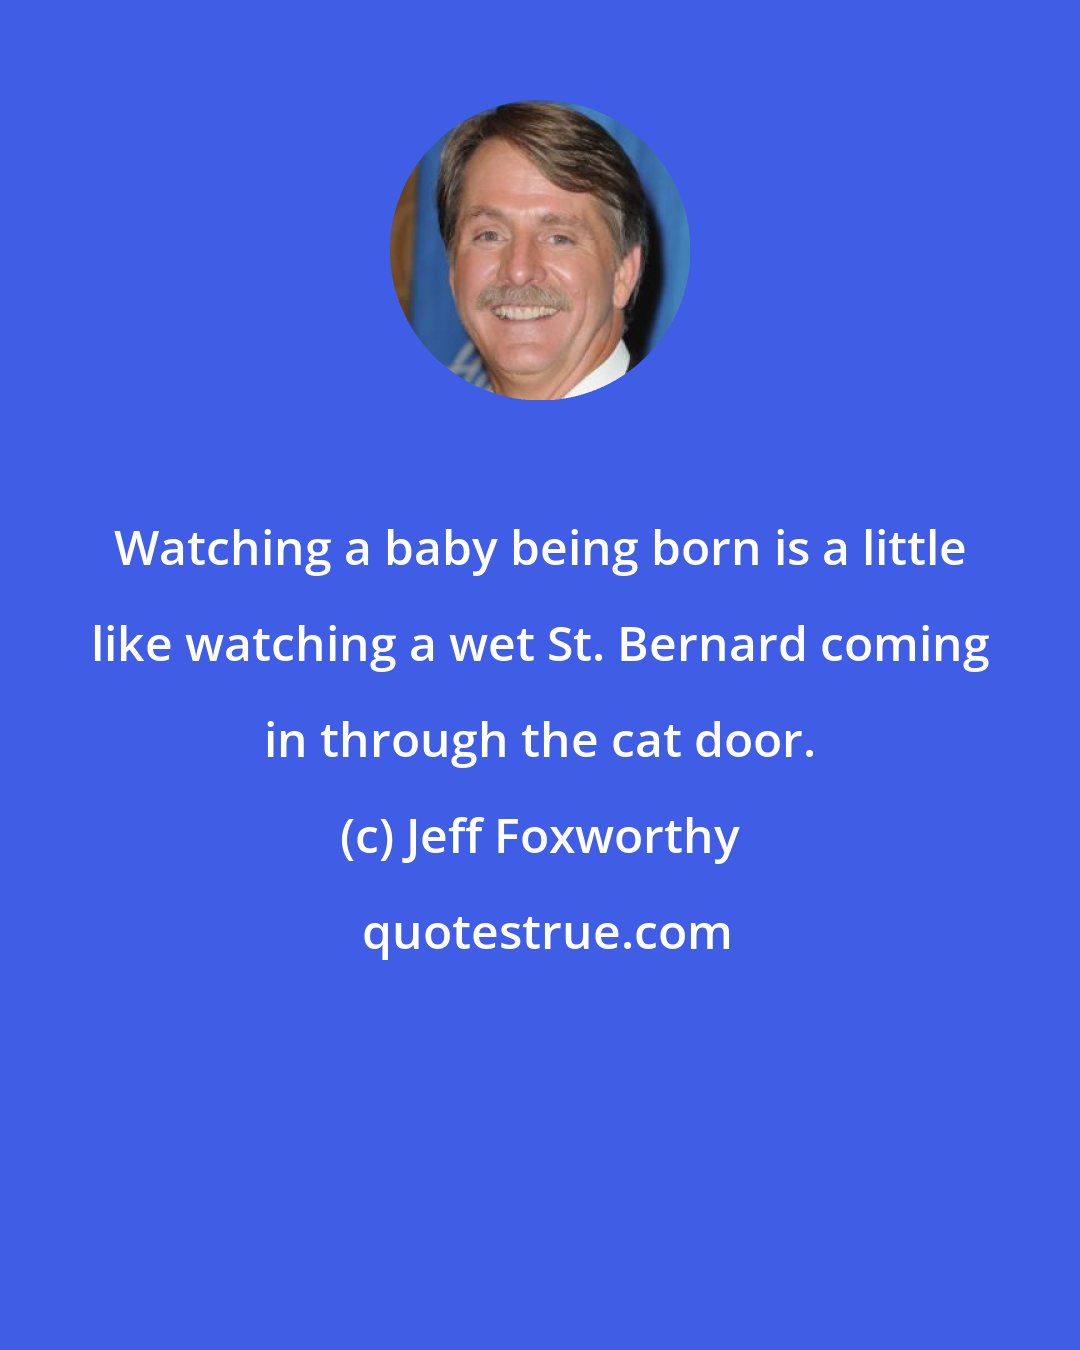 Jeff Foxworthy: Watching a baby being born is a little like watching a wet St. Bernard coming in through the cat door.